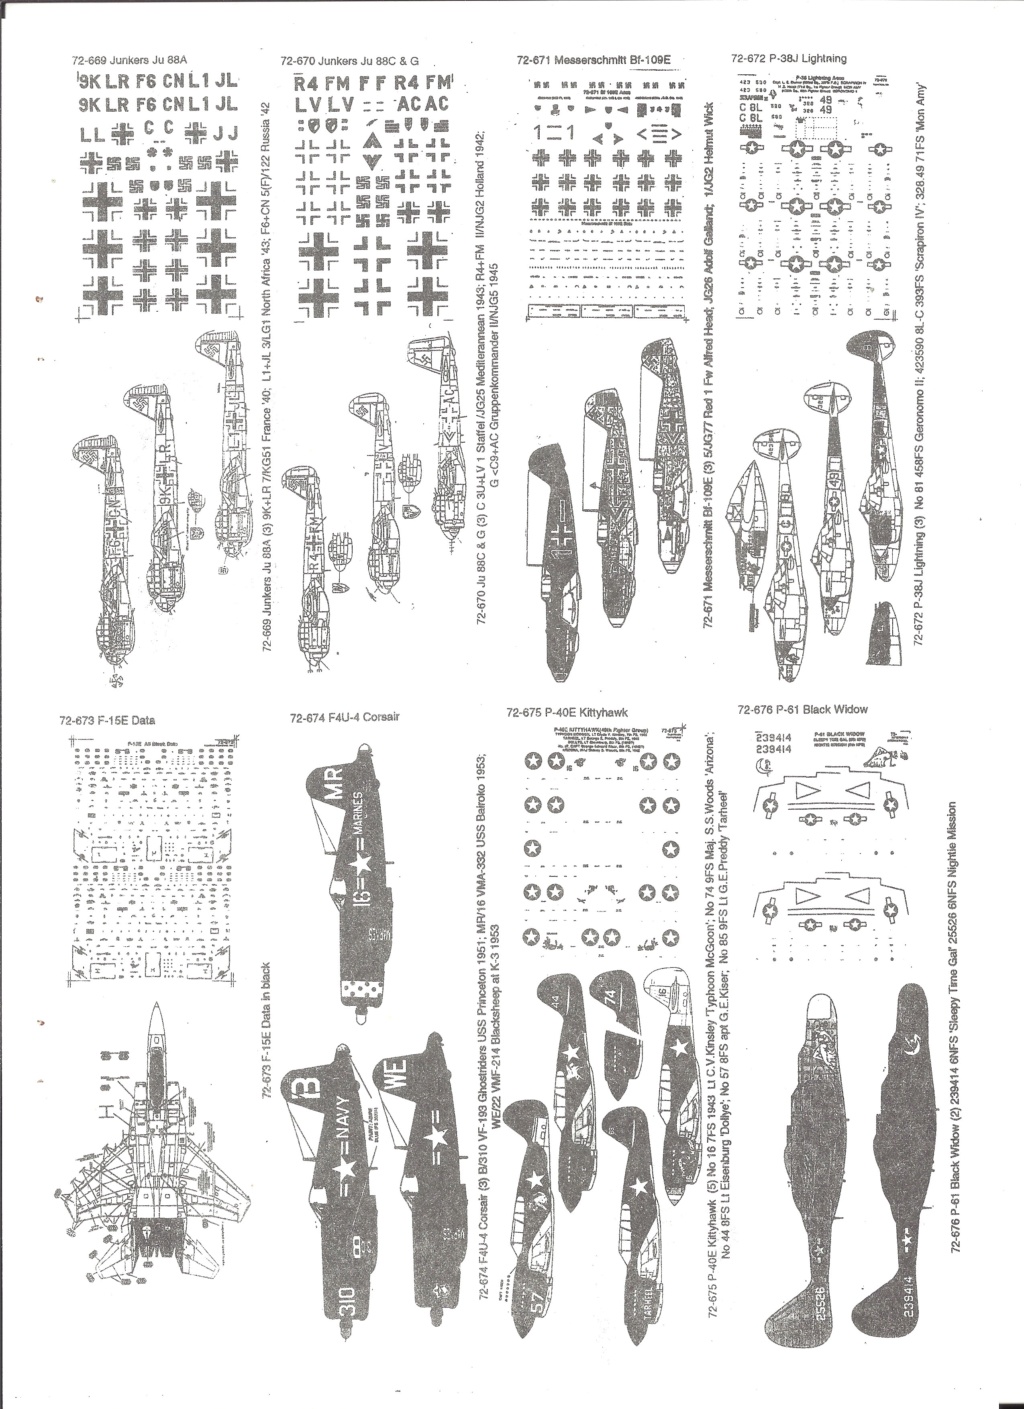 [SUPERSCALE DECALS & XTRADECAL 1993] Catalogue 1993 Super113